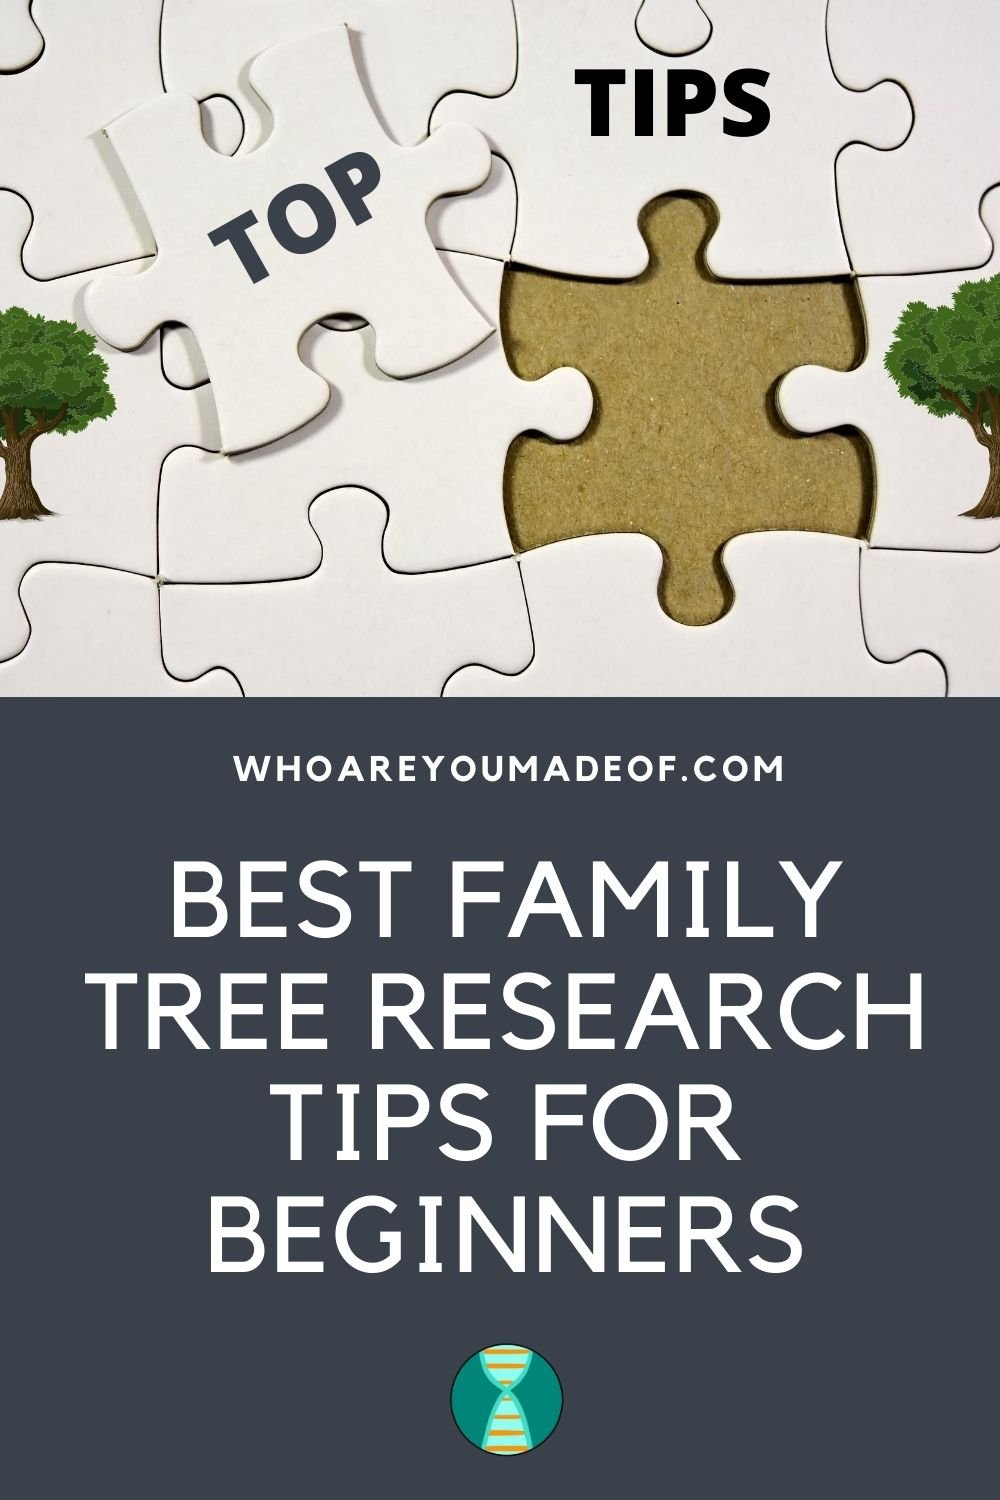 Best Family Tree Research Tips for Beginners, Pinterest image with puzzle pieces saying "Top Tips" 